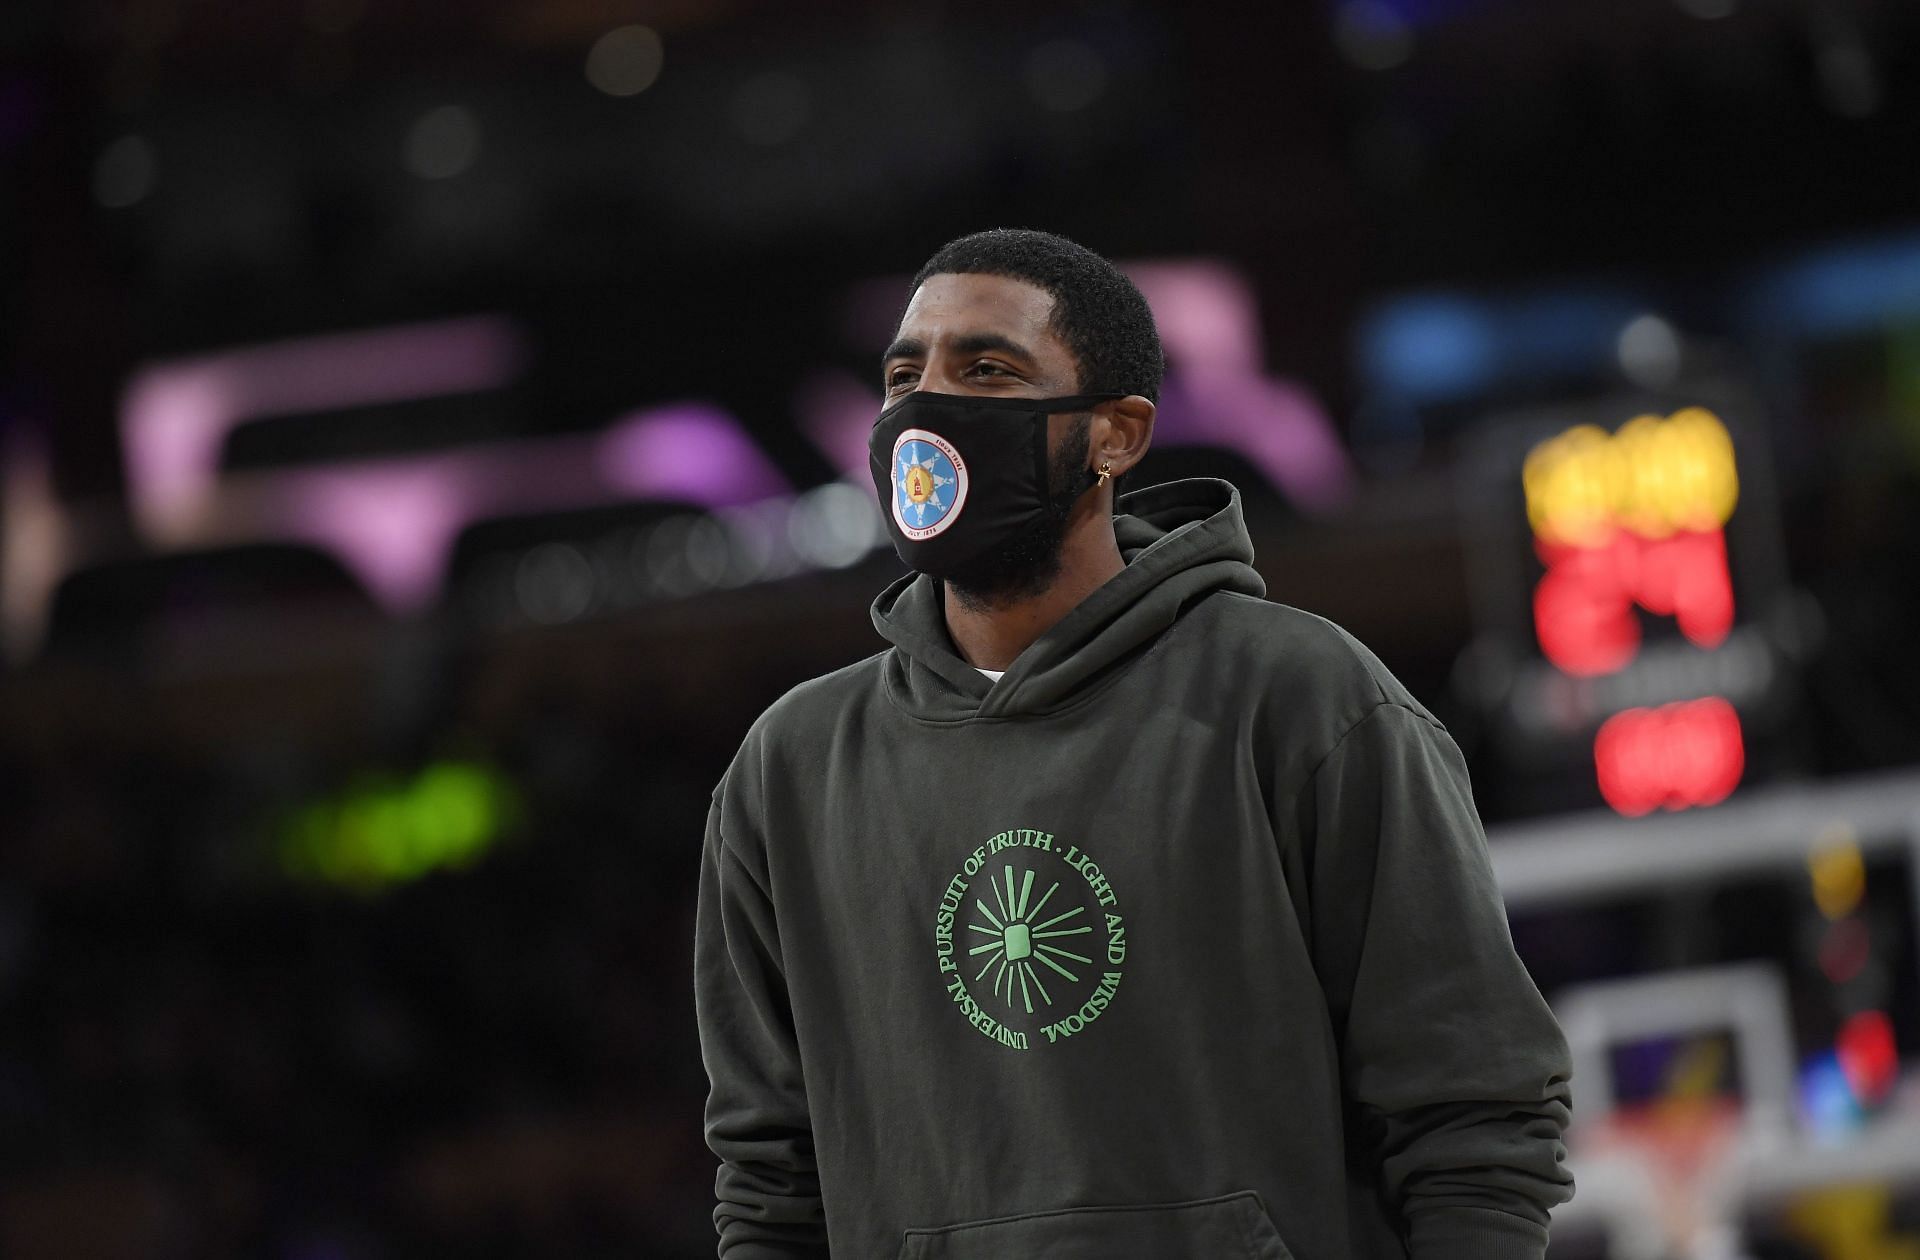 Brooklyn Nets All-Star Kyrie Irving with a mask on